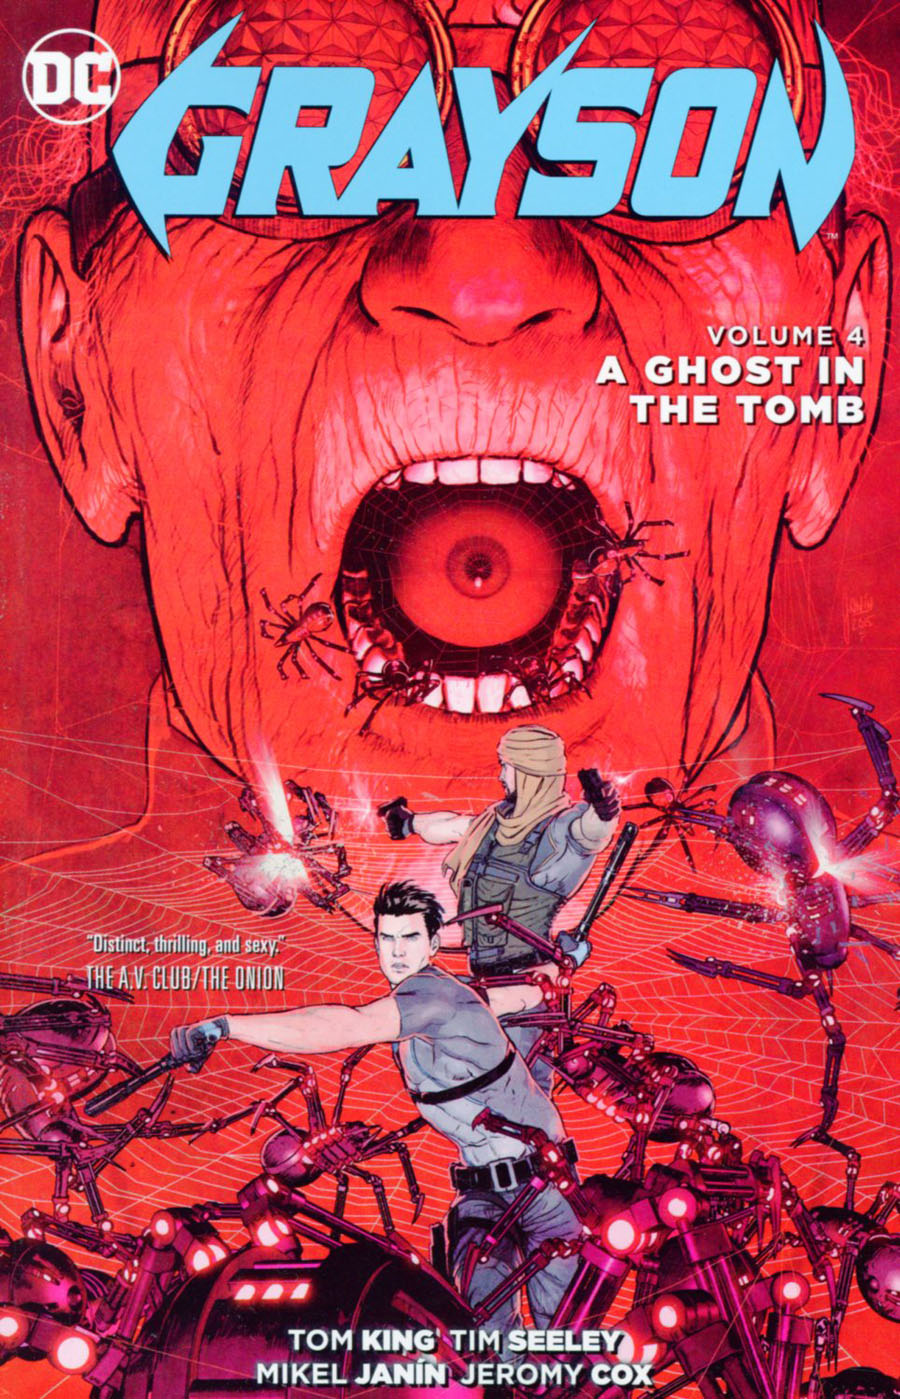 Grayson (New 52) Vol 4 A Ghost In The Tomb TP